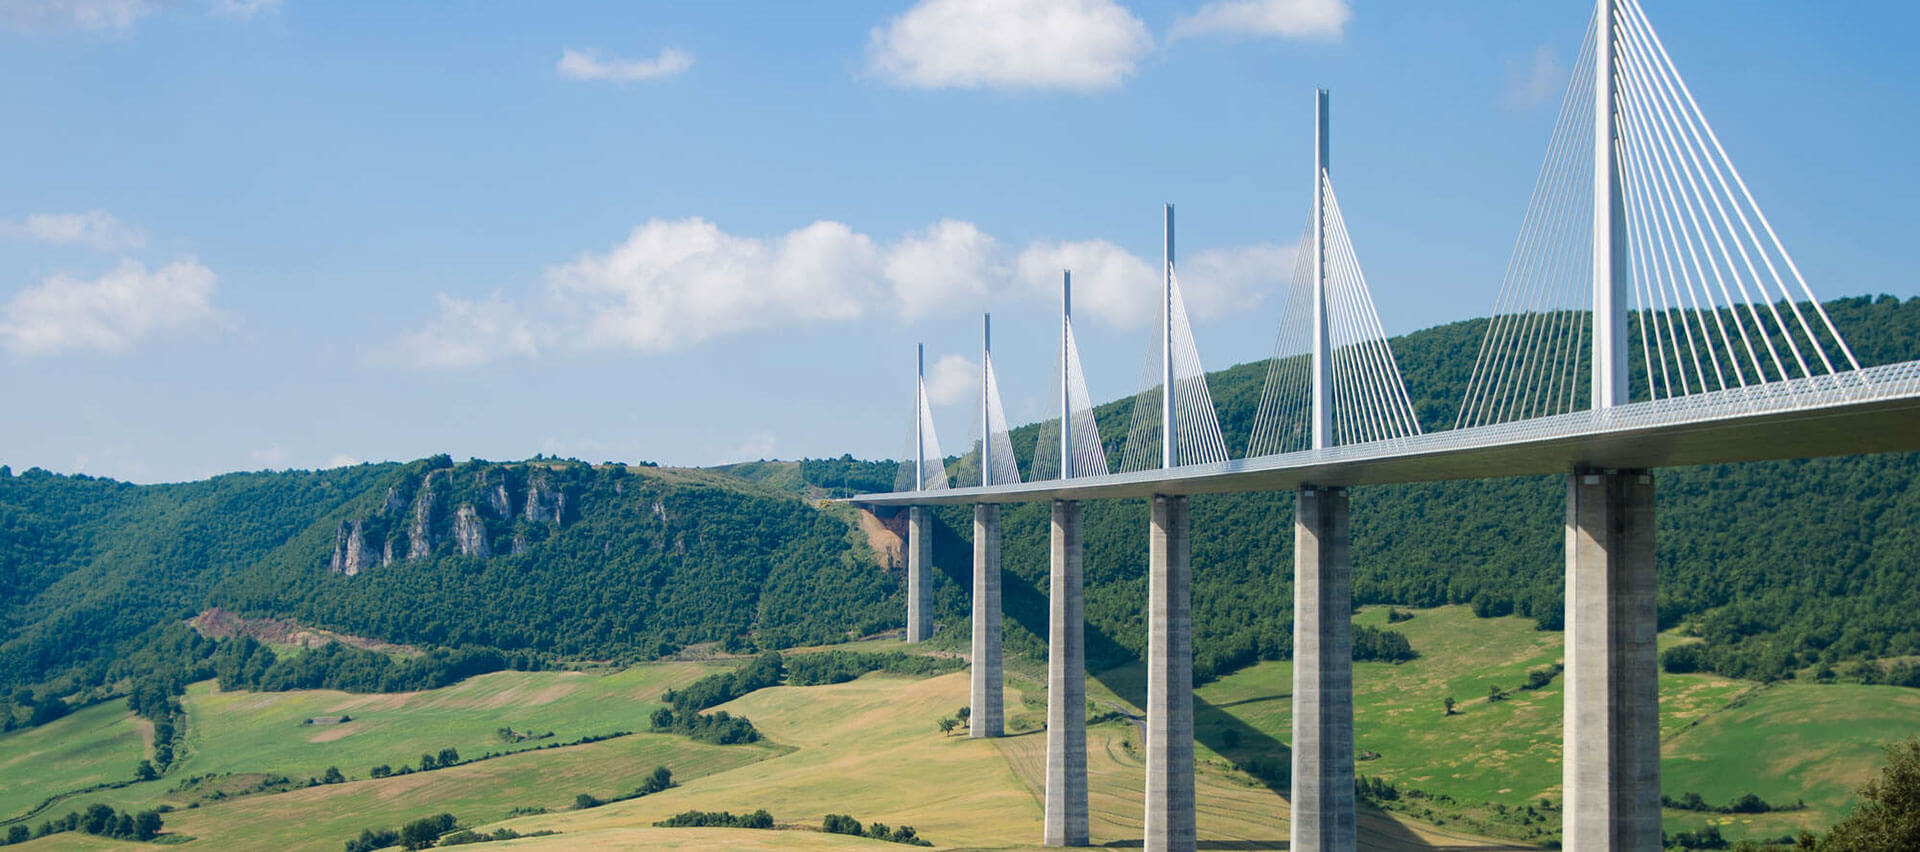 View of the Millau viaduct in Aveyron